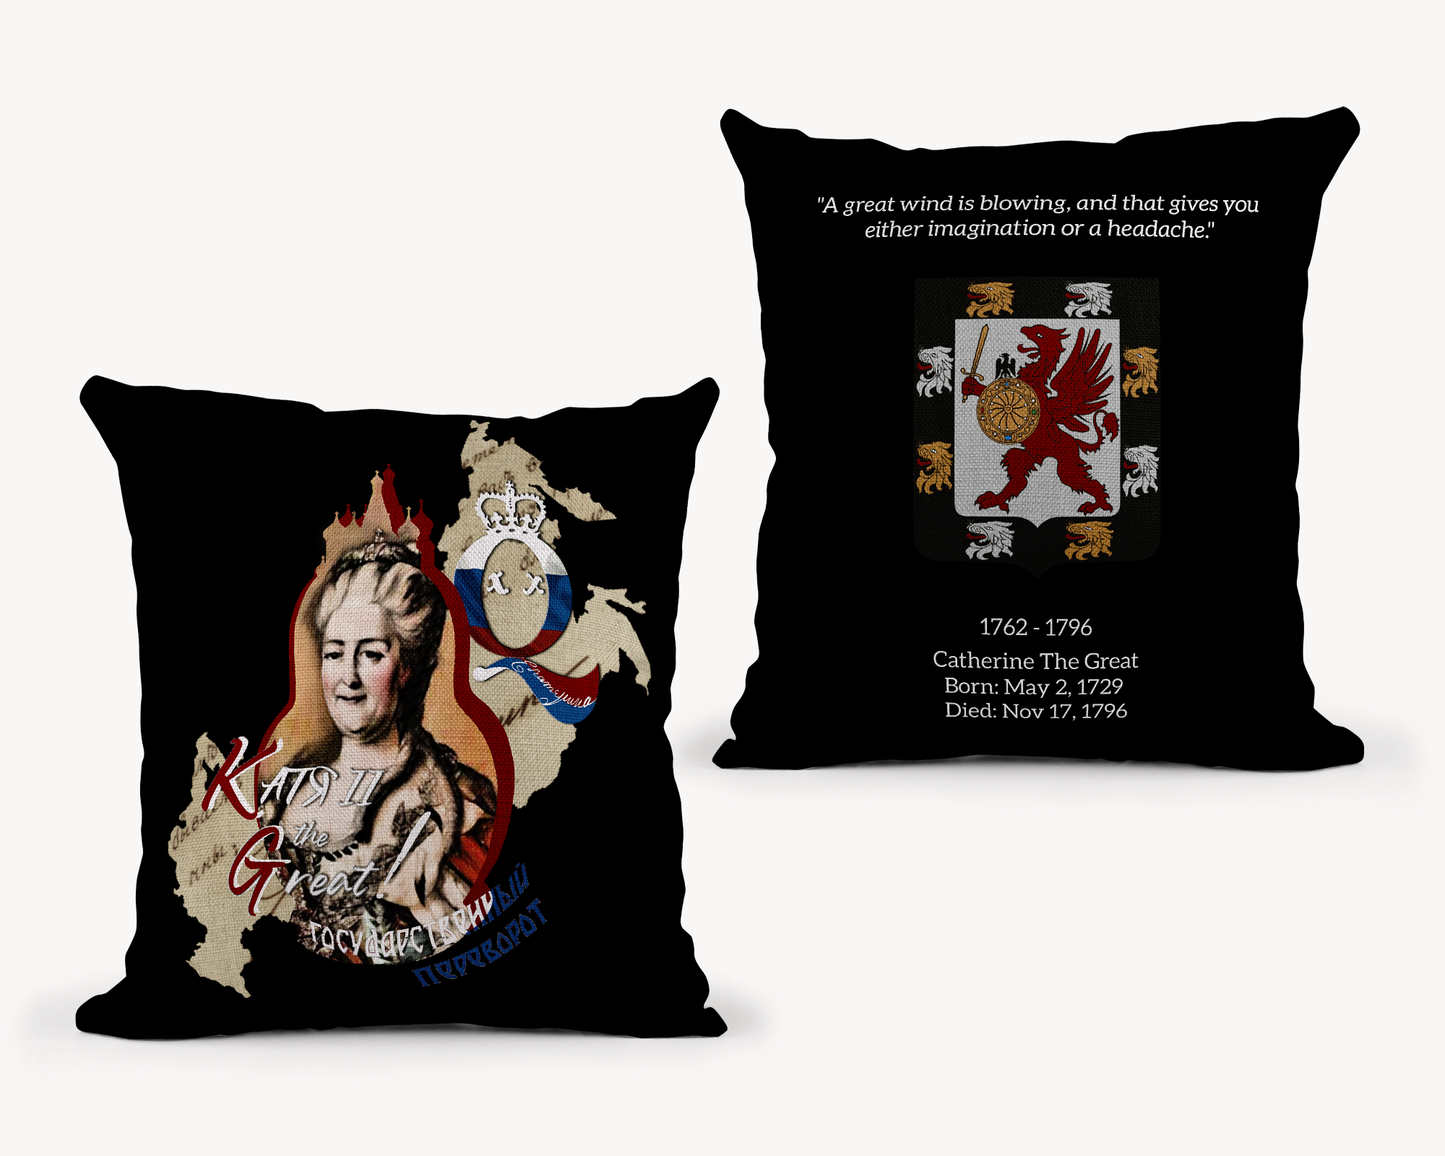 Catherine The Great Black Pillow 22x22